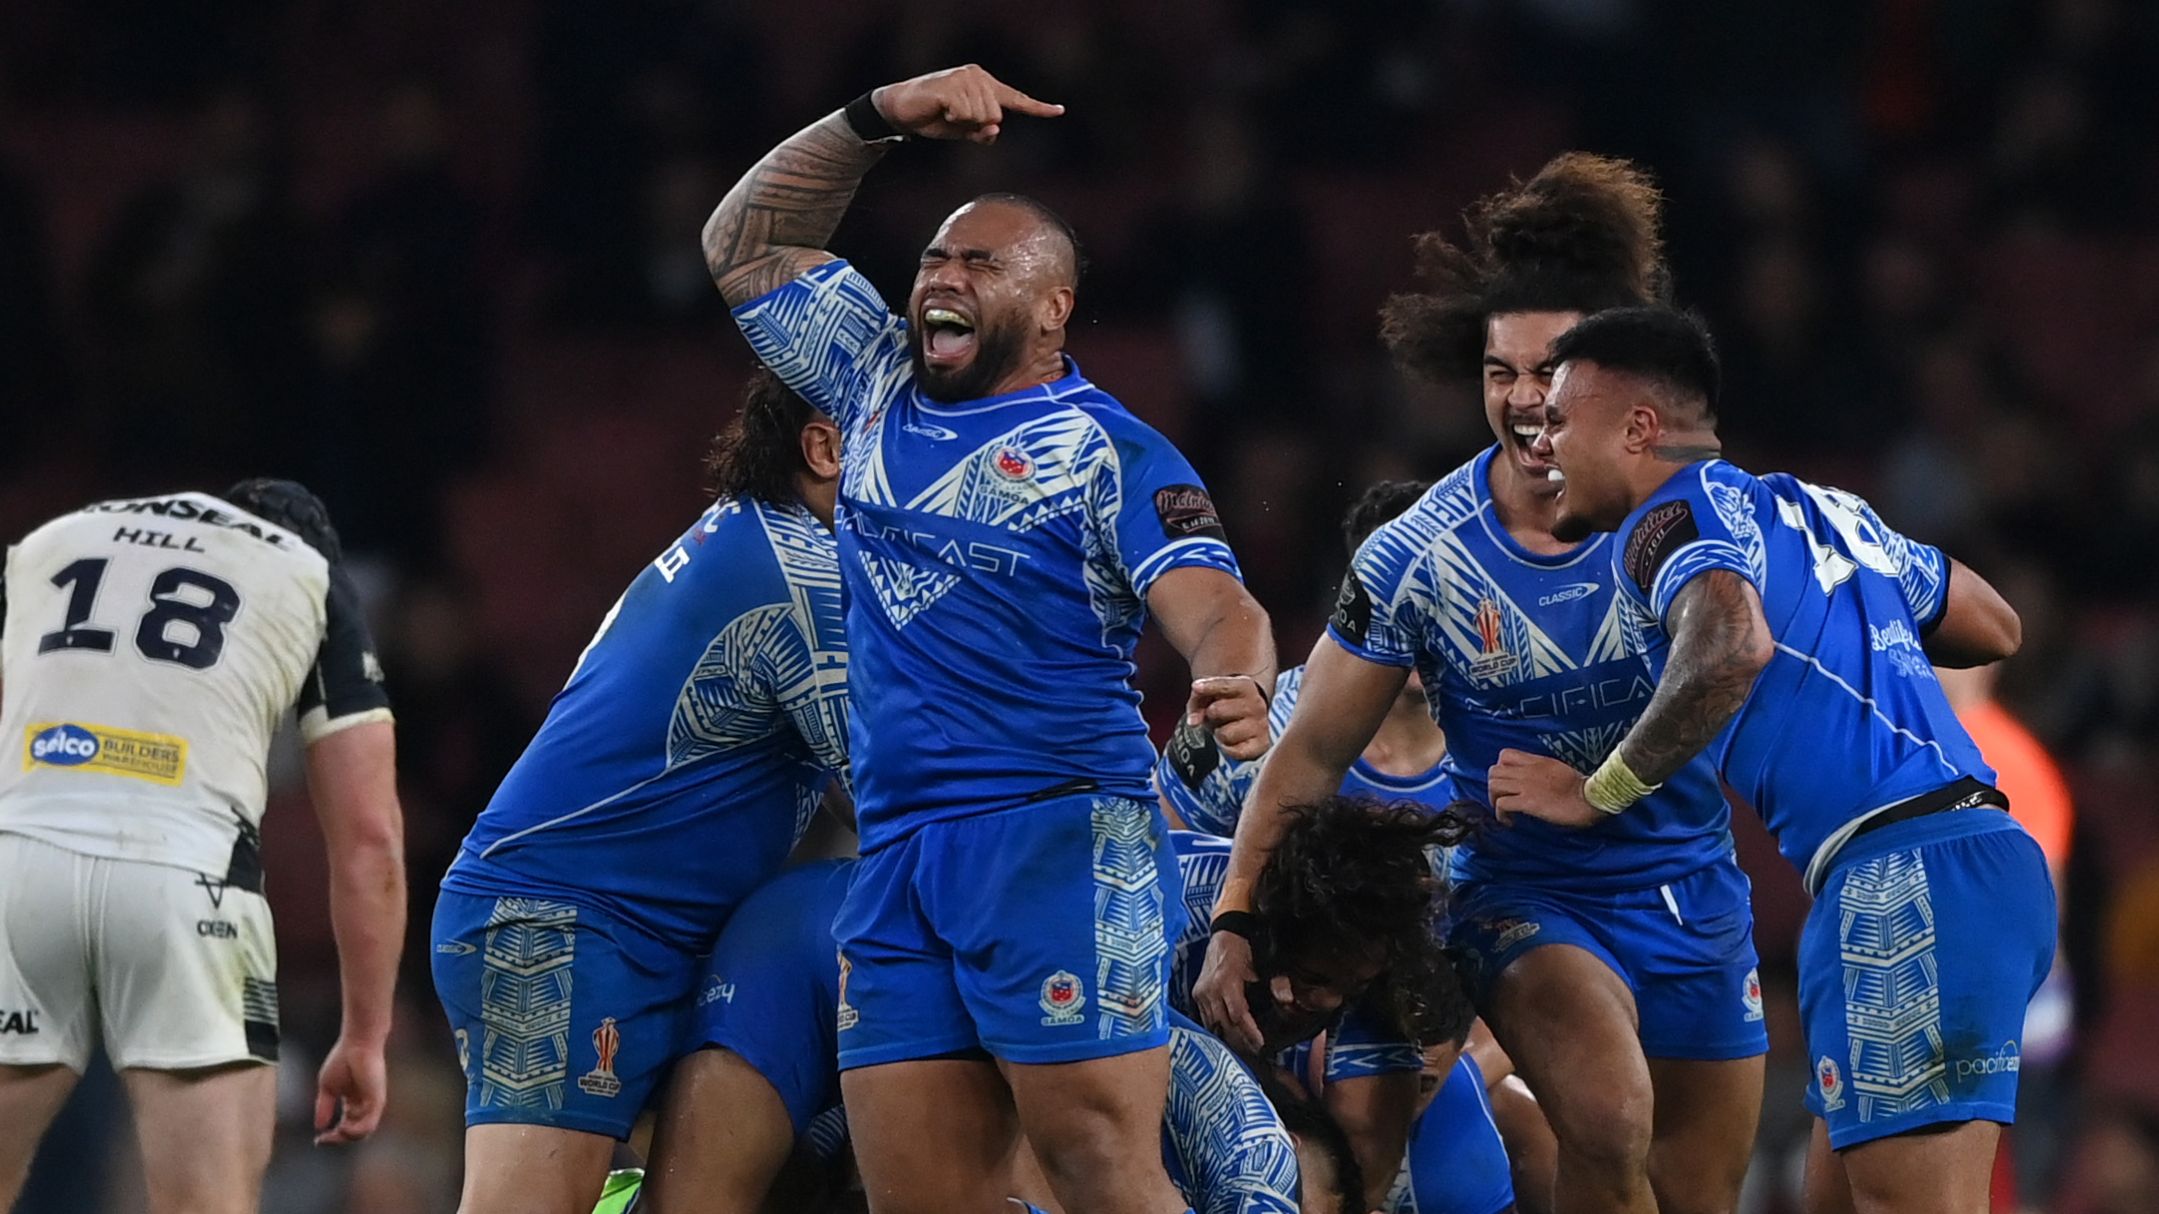 England v Samoa LIVE Watch Rugby League World Cup semi-finals, plus follow live radio commentary, text updates and latest score - Live